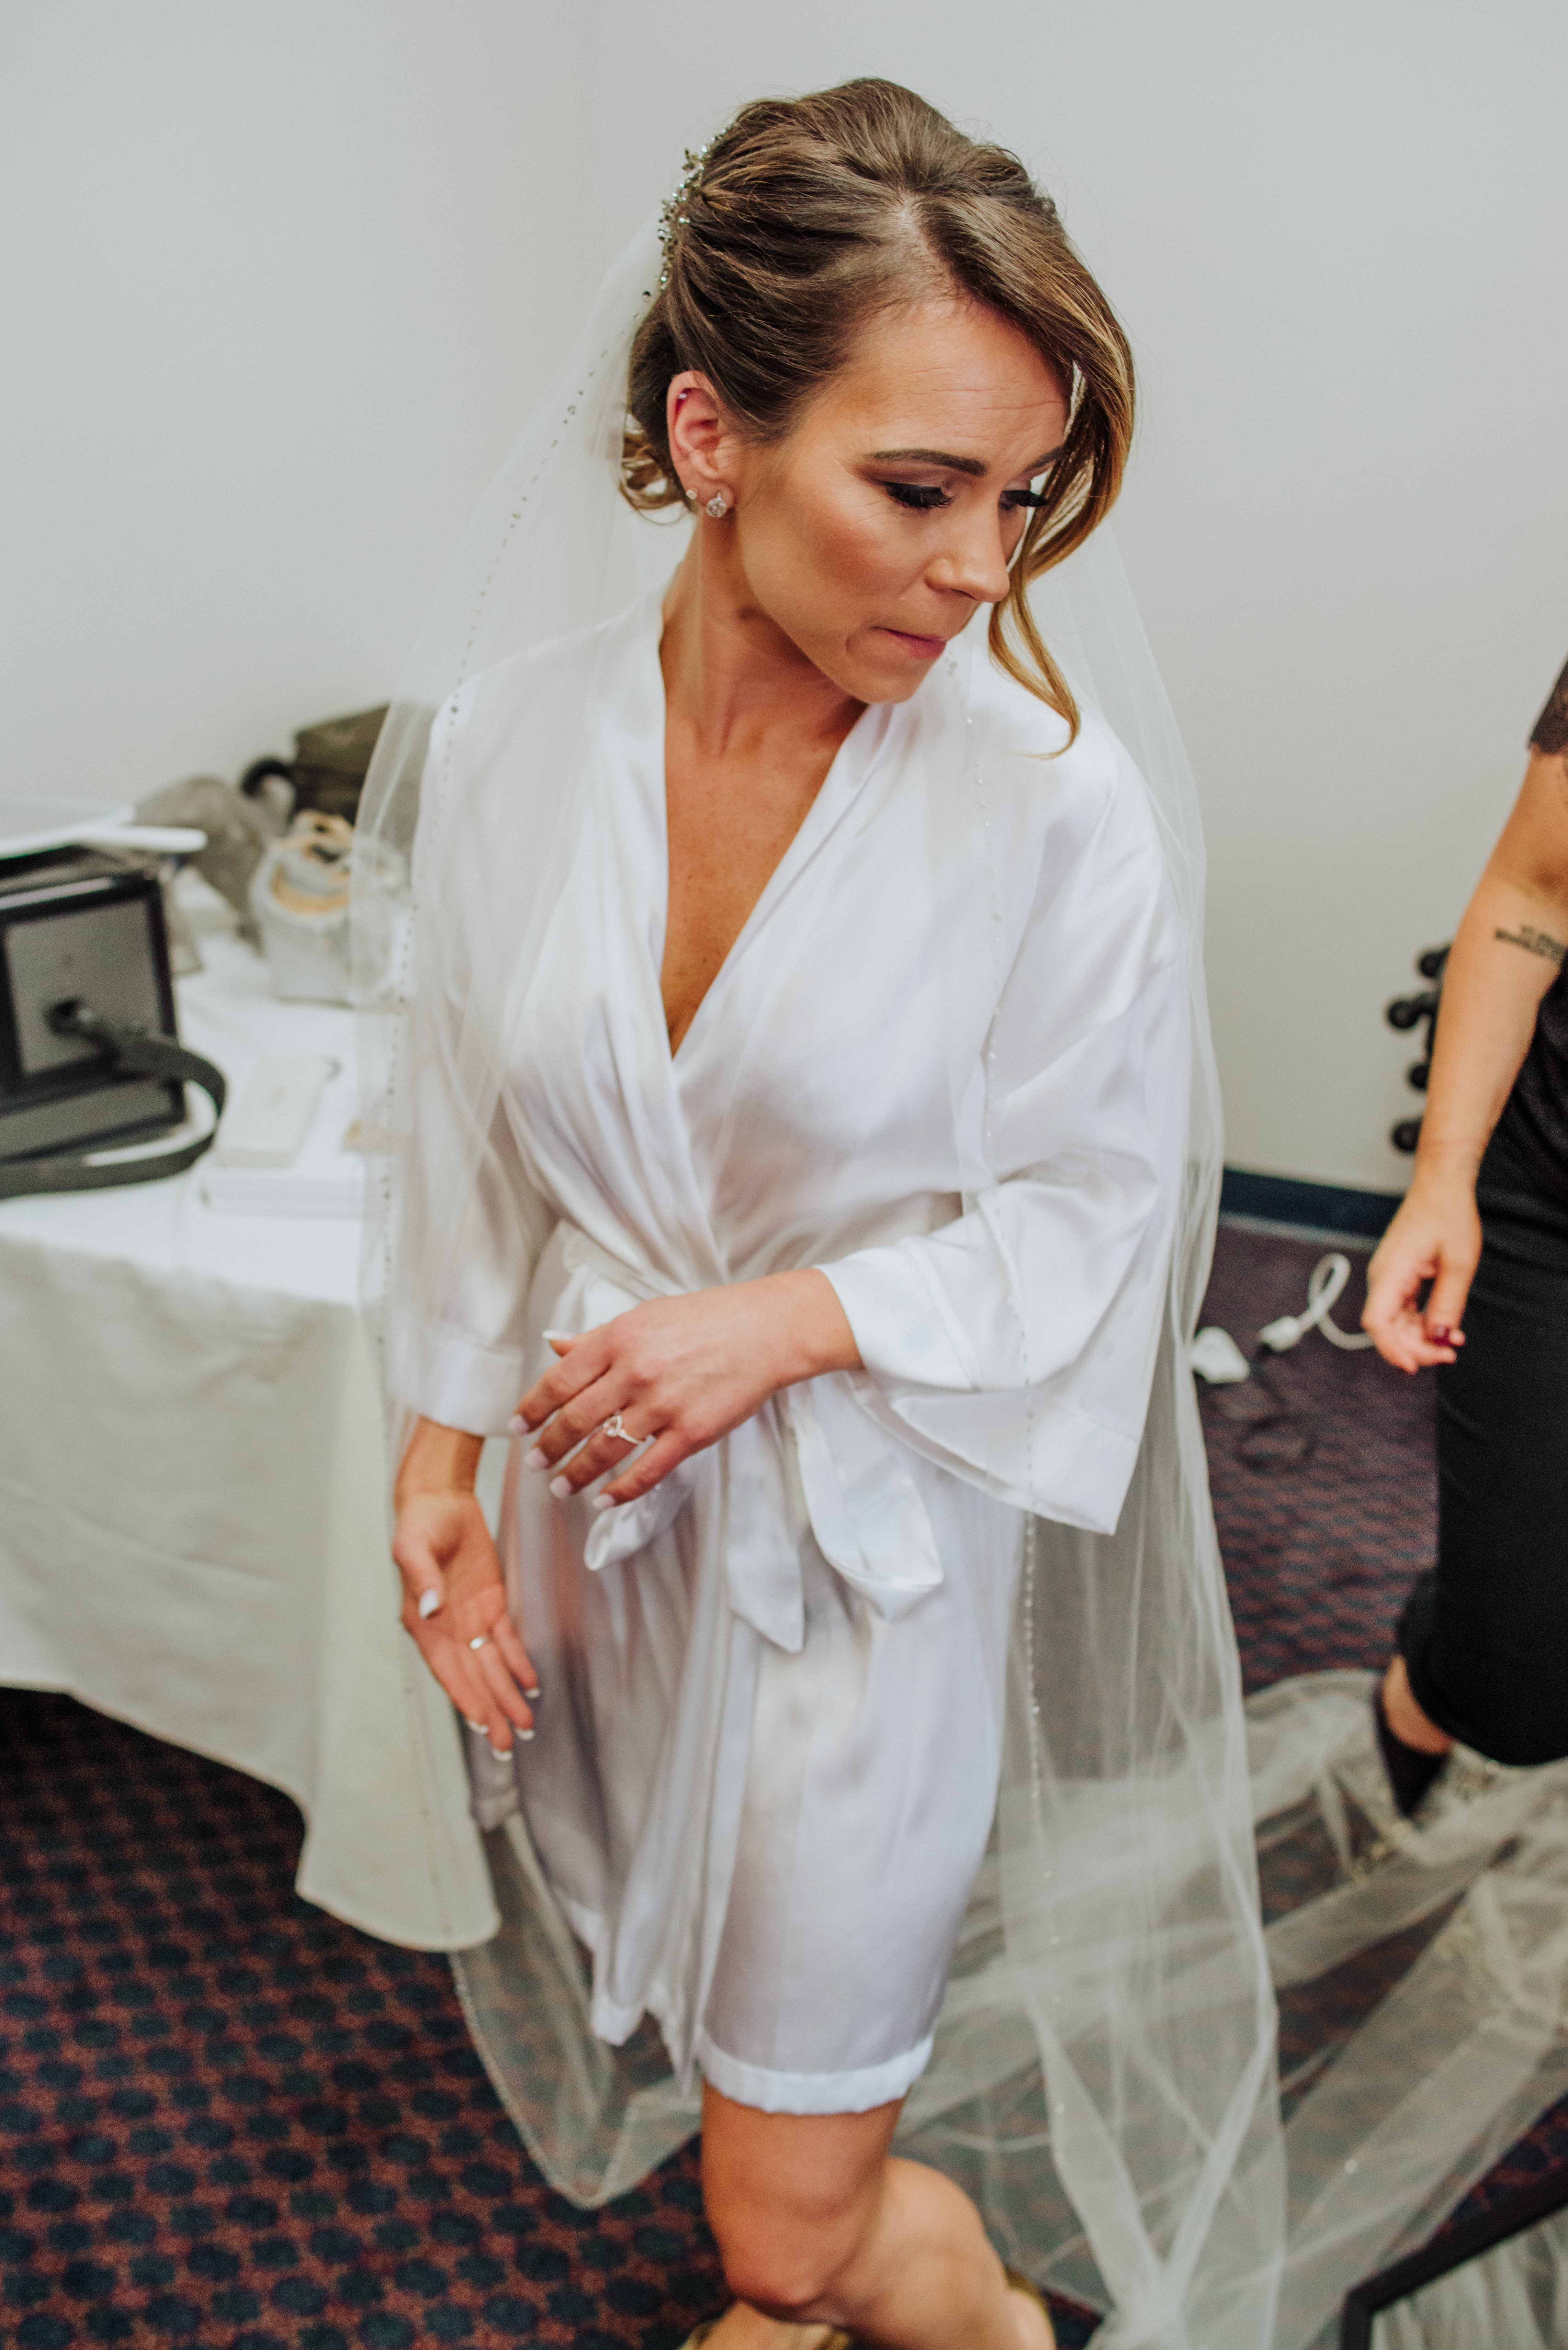 Bride getting ready with veilat a Romantic Style San Diego Wedding at Marina Village by Kylie Rae Photography